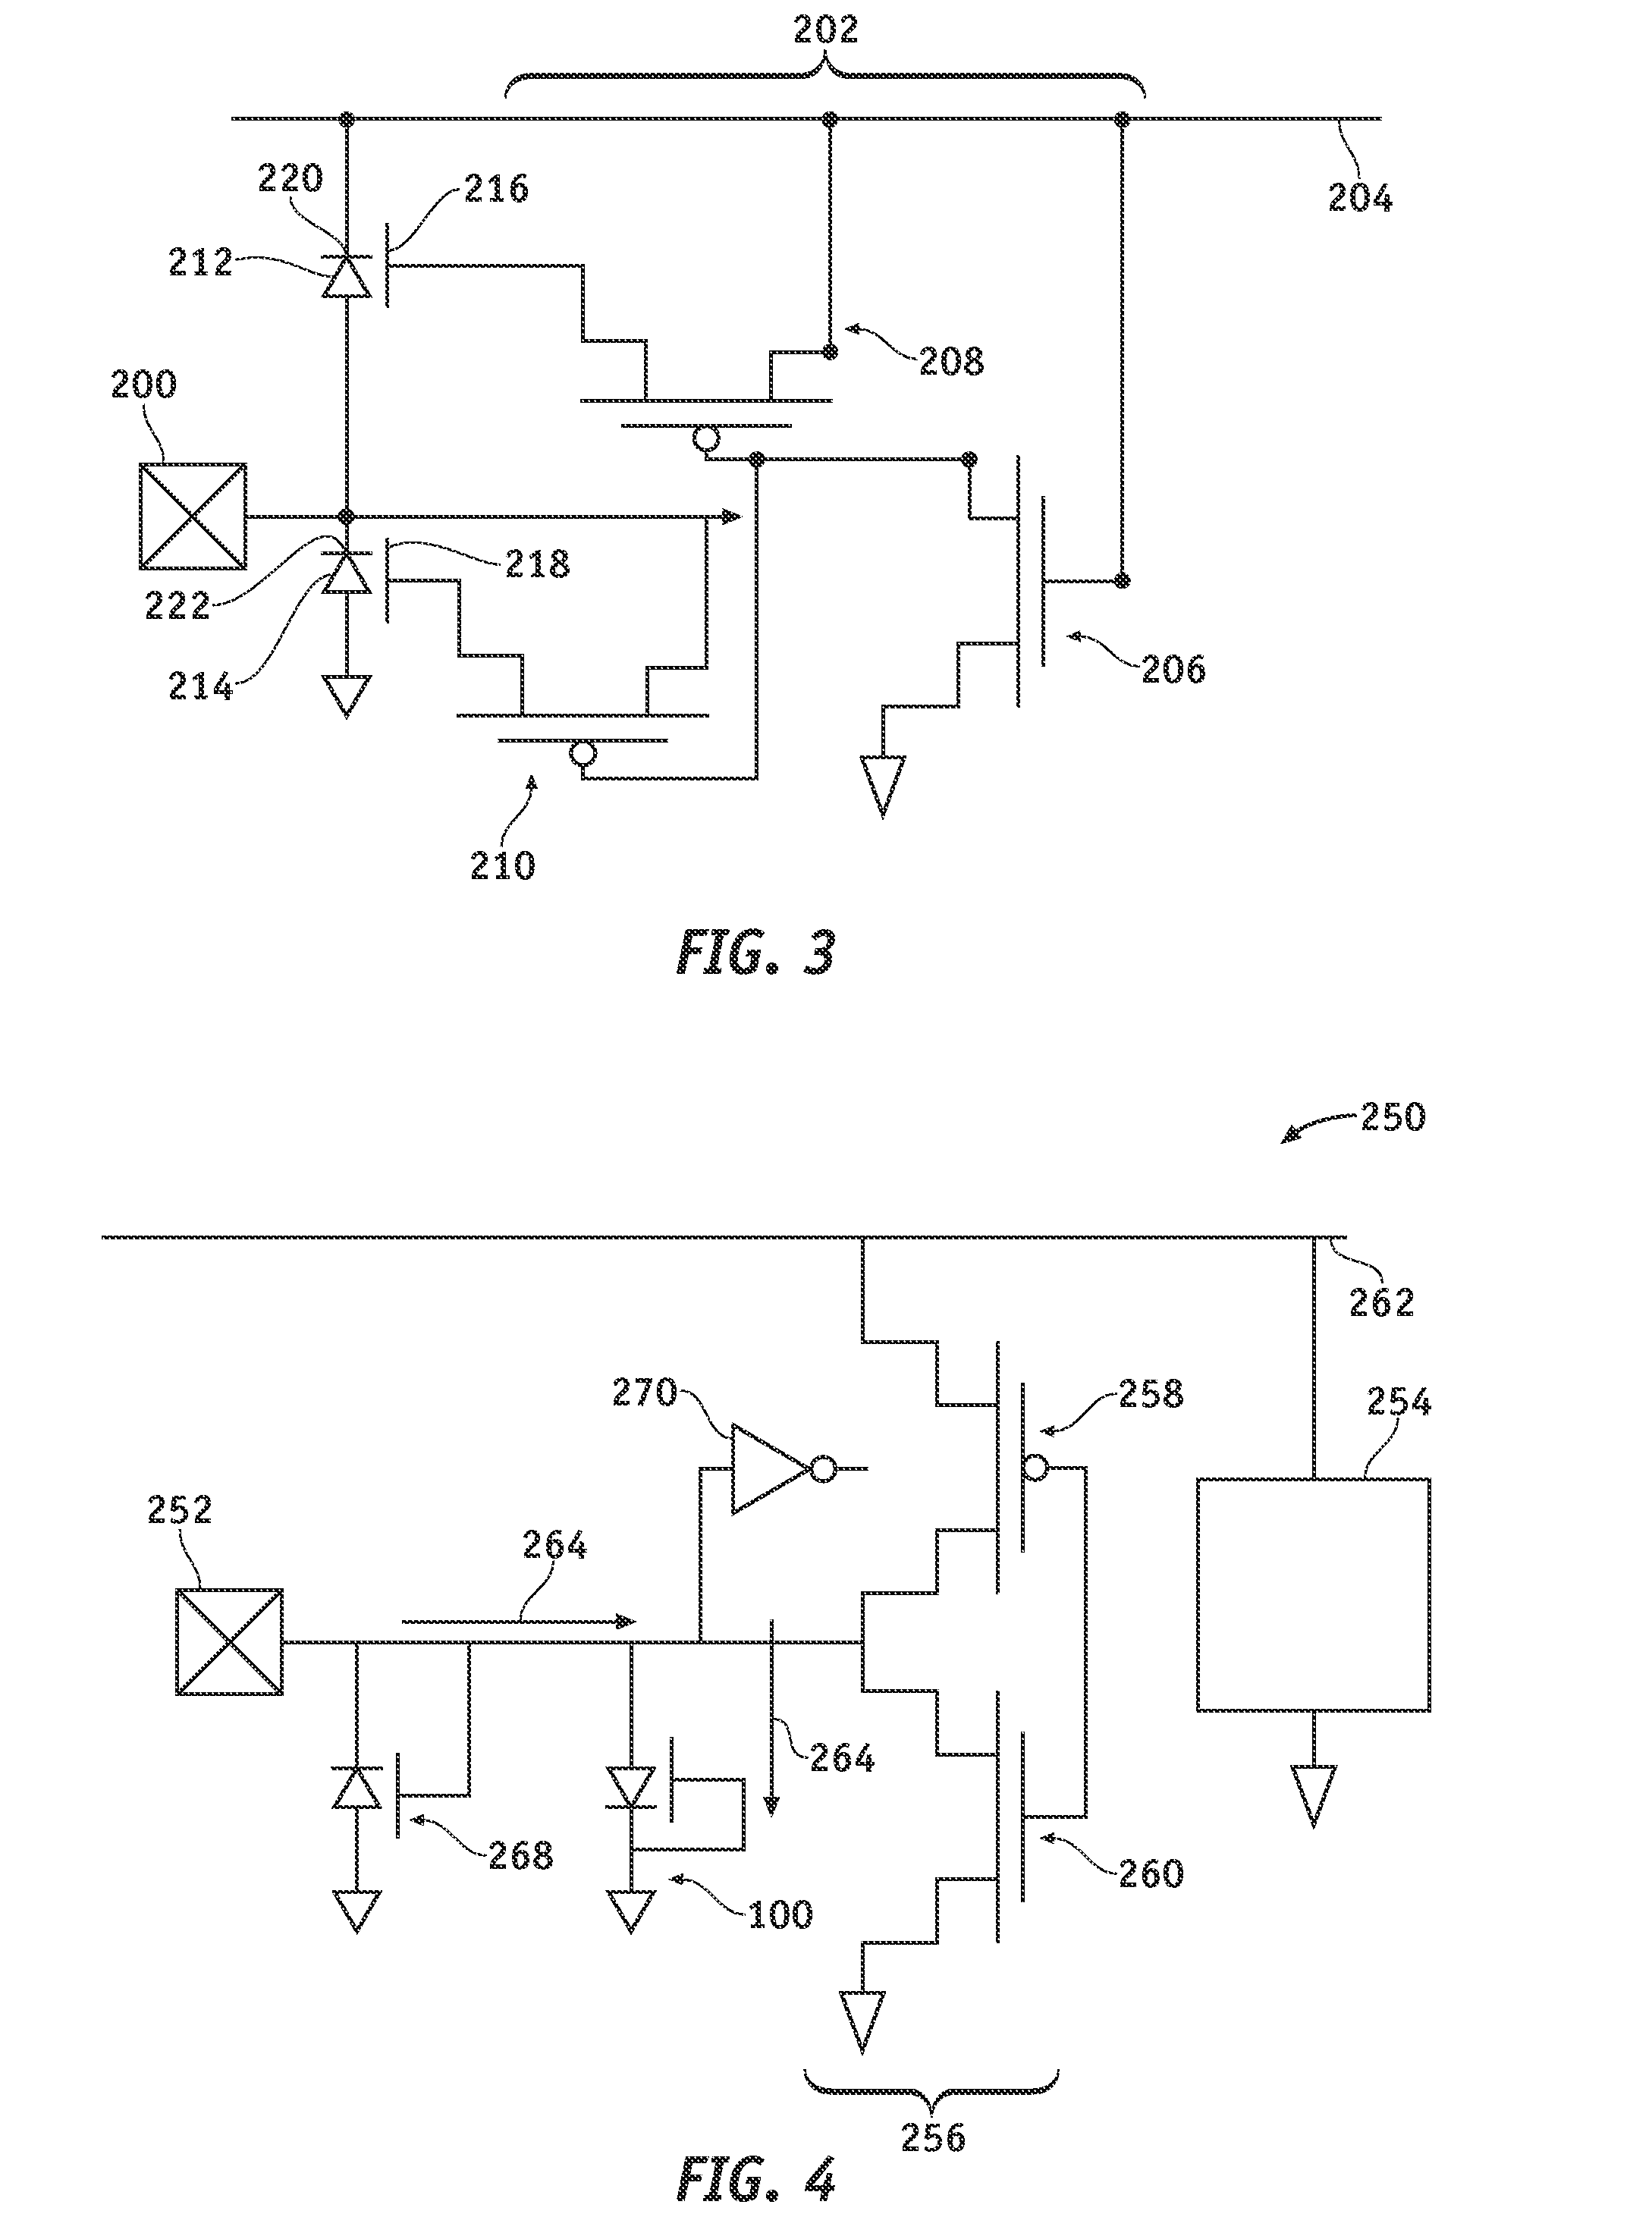 Electrostatic discharge protection devices and methods for protecting semiconductor devices against electrostatic discharge events